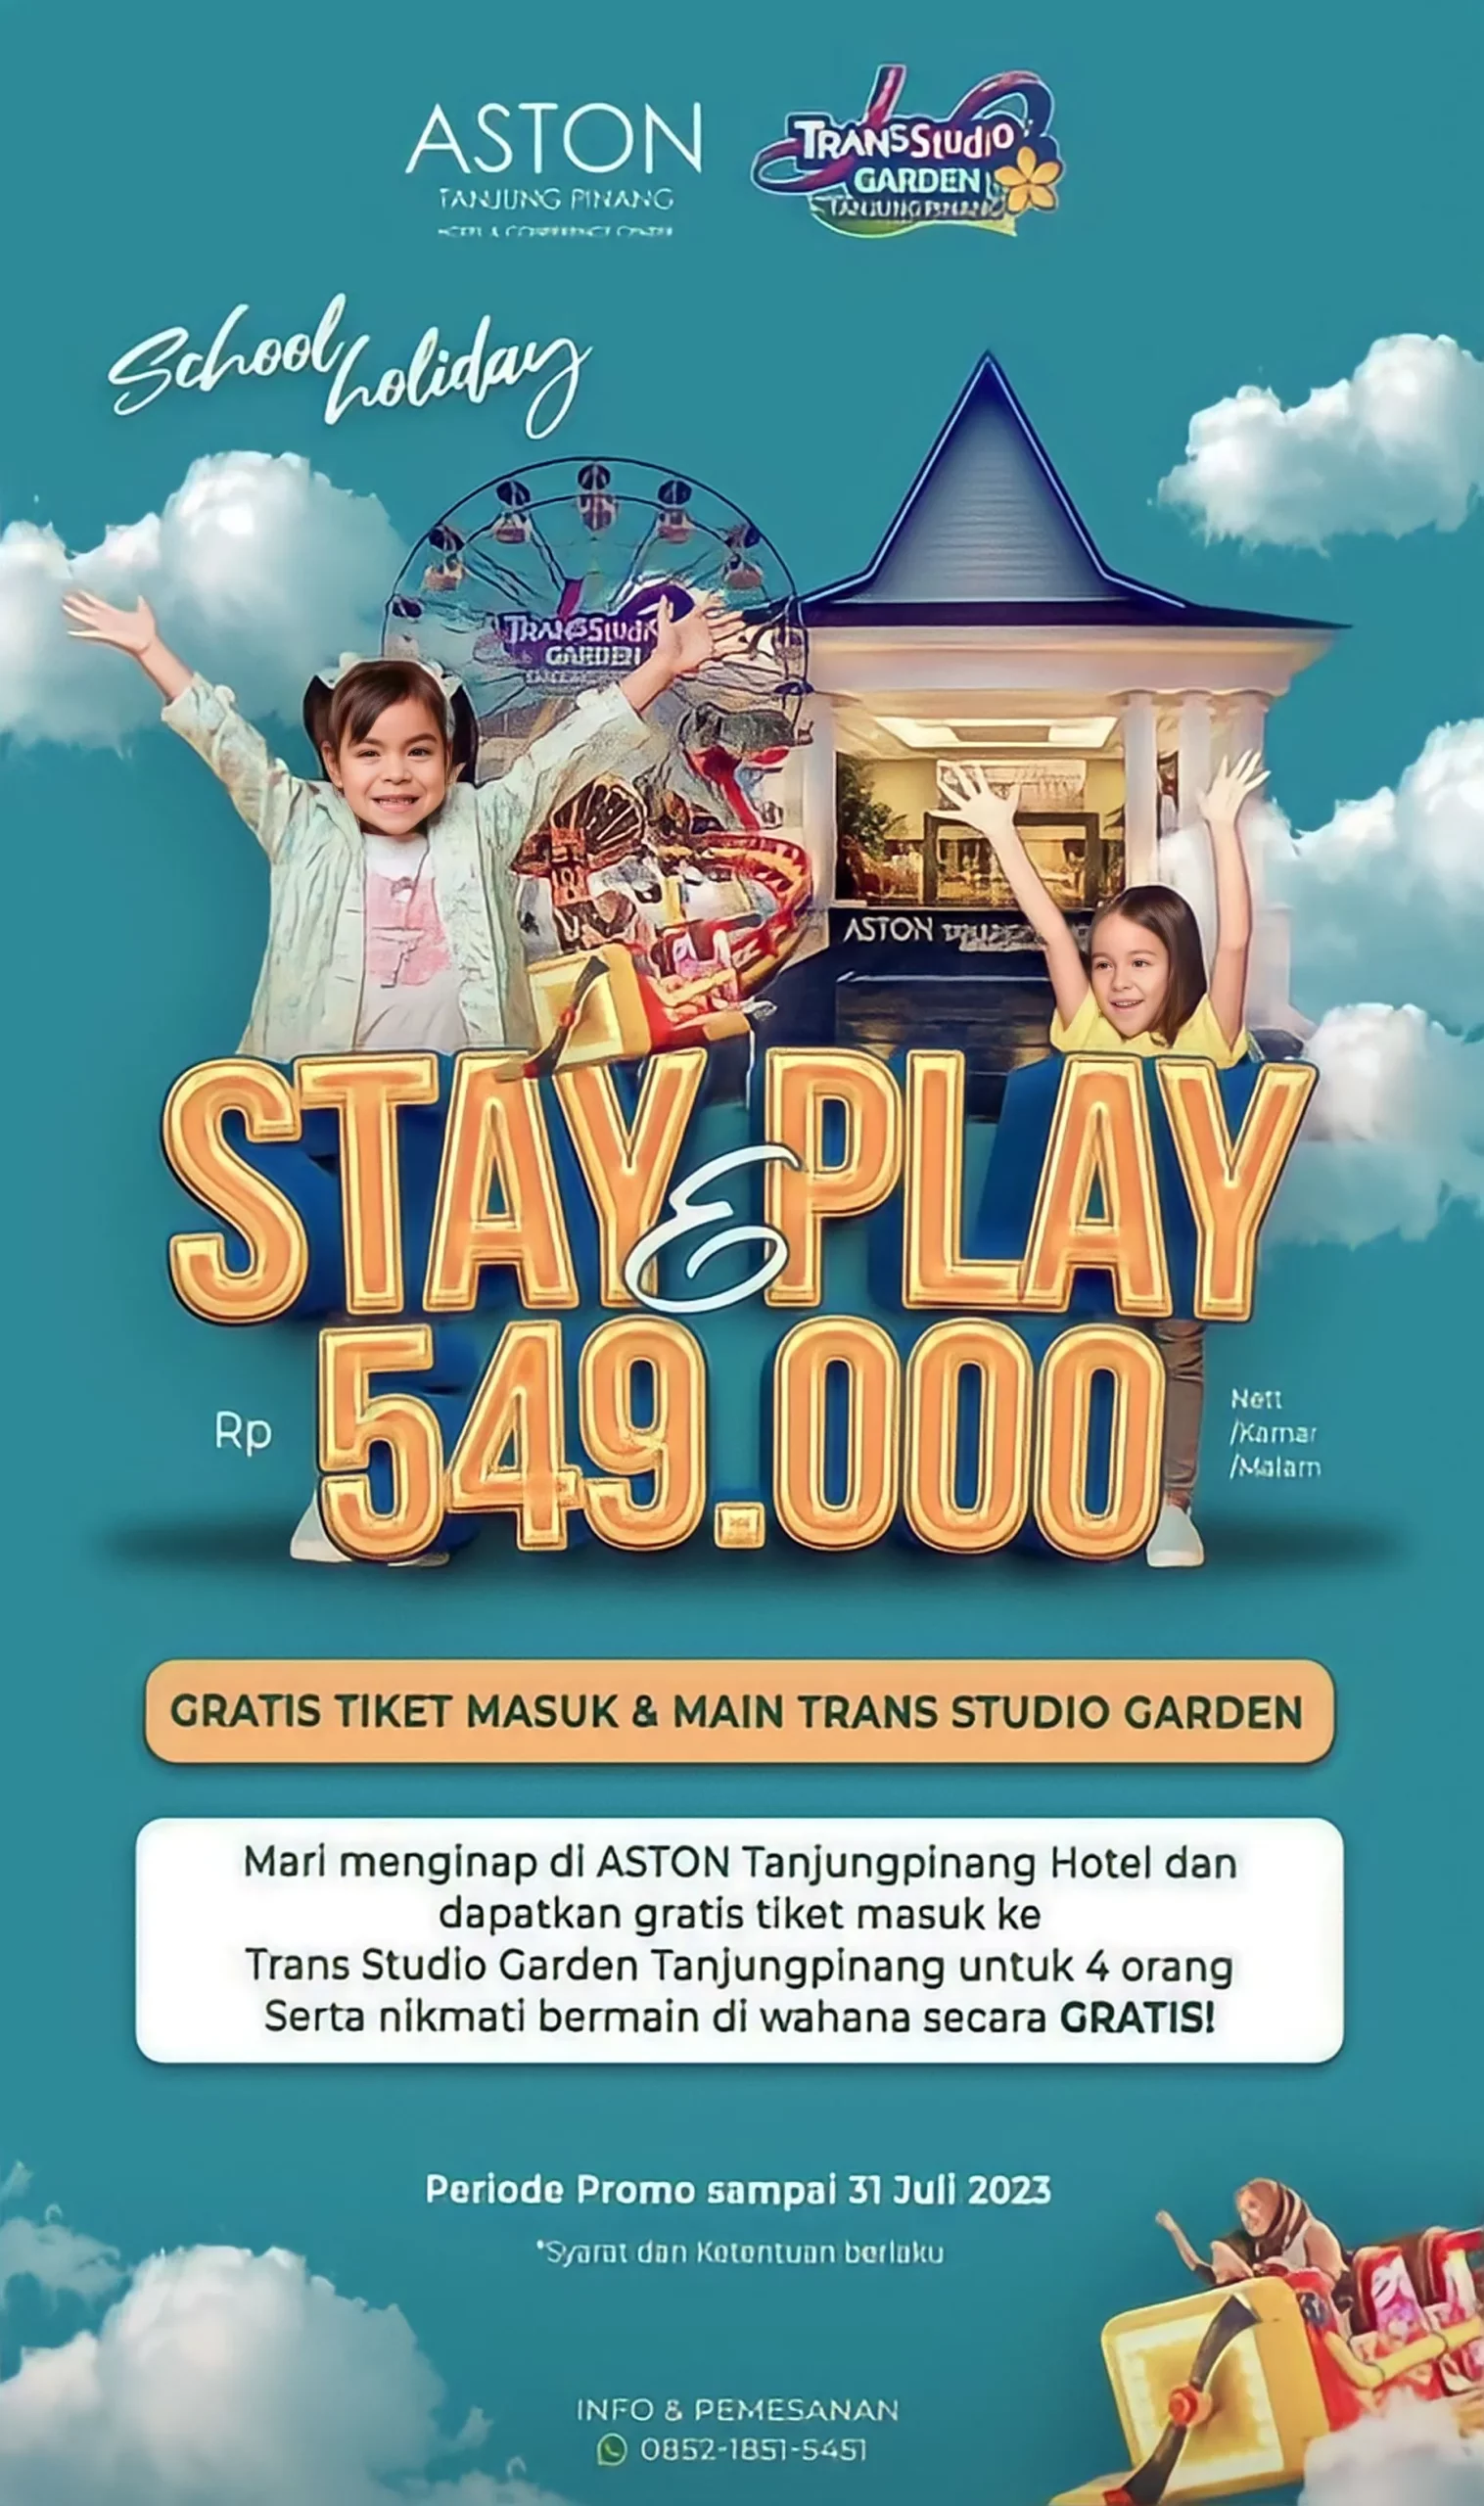 Special School Holiday, Promo Stay and Play di Hotel Aston Tanjung Pinang